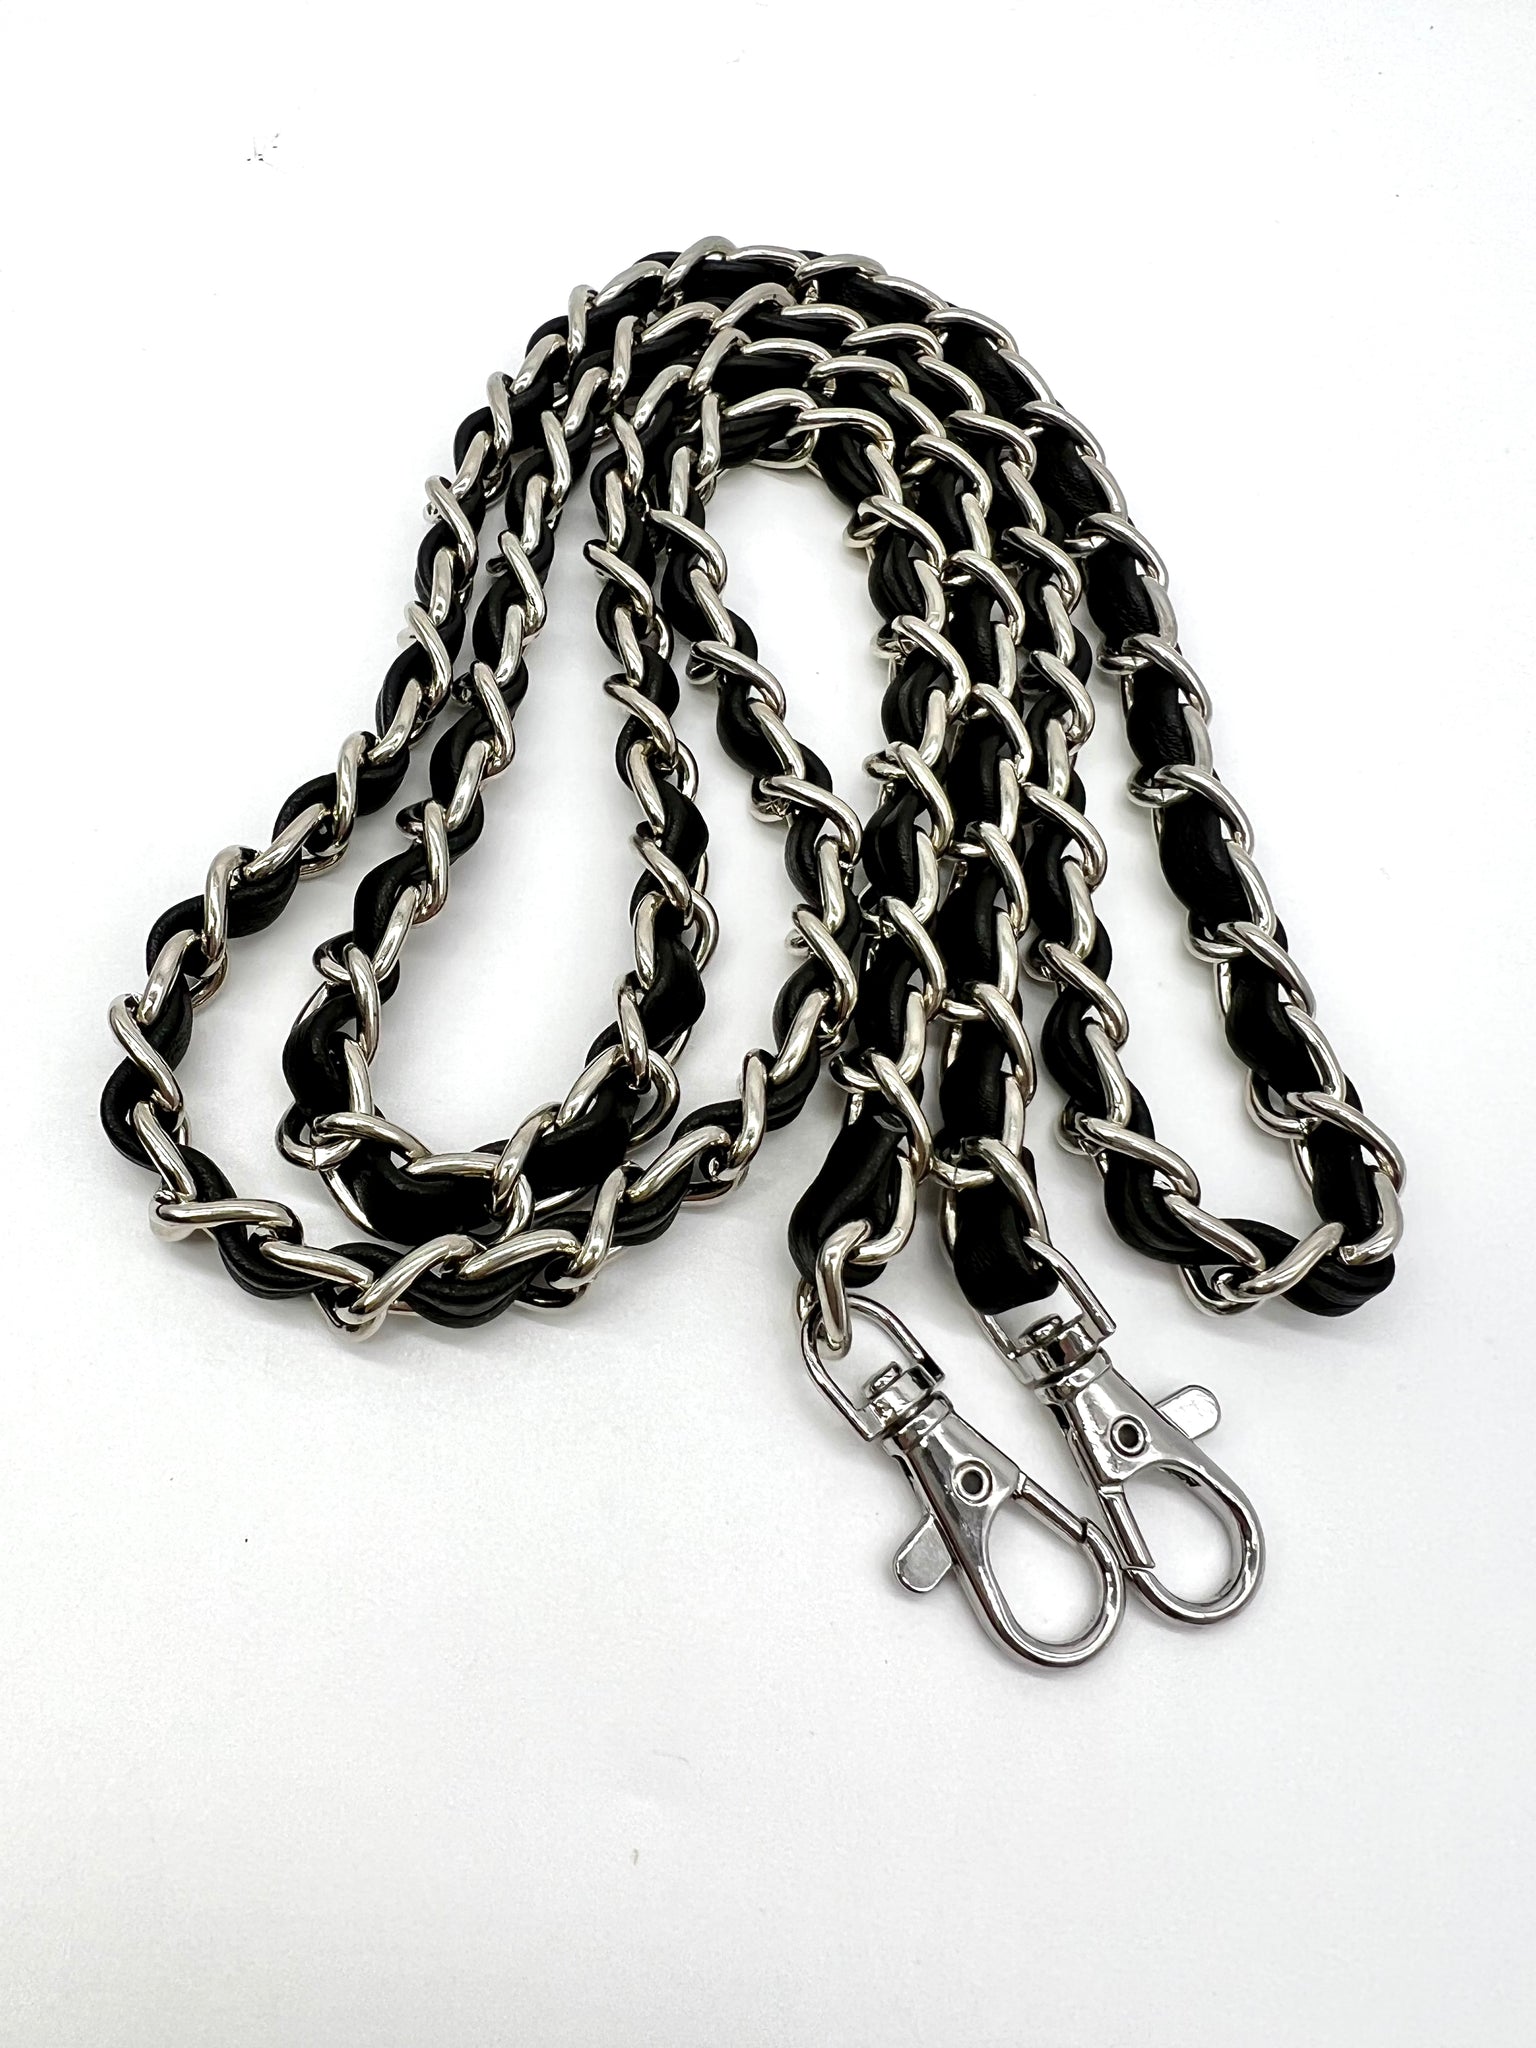 NEW Metal and Black Leather Purse Chain Straps